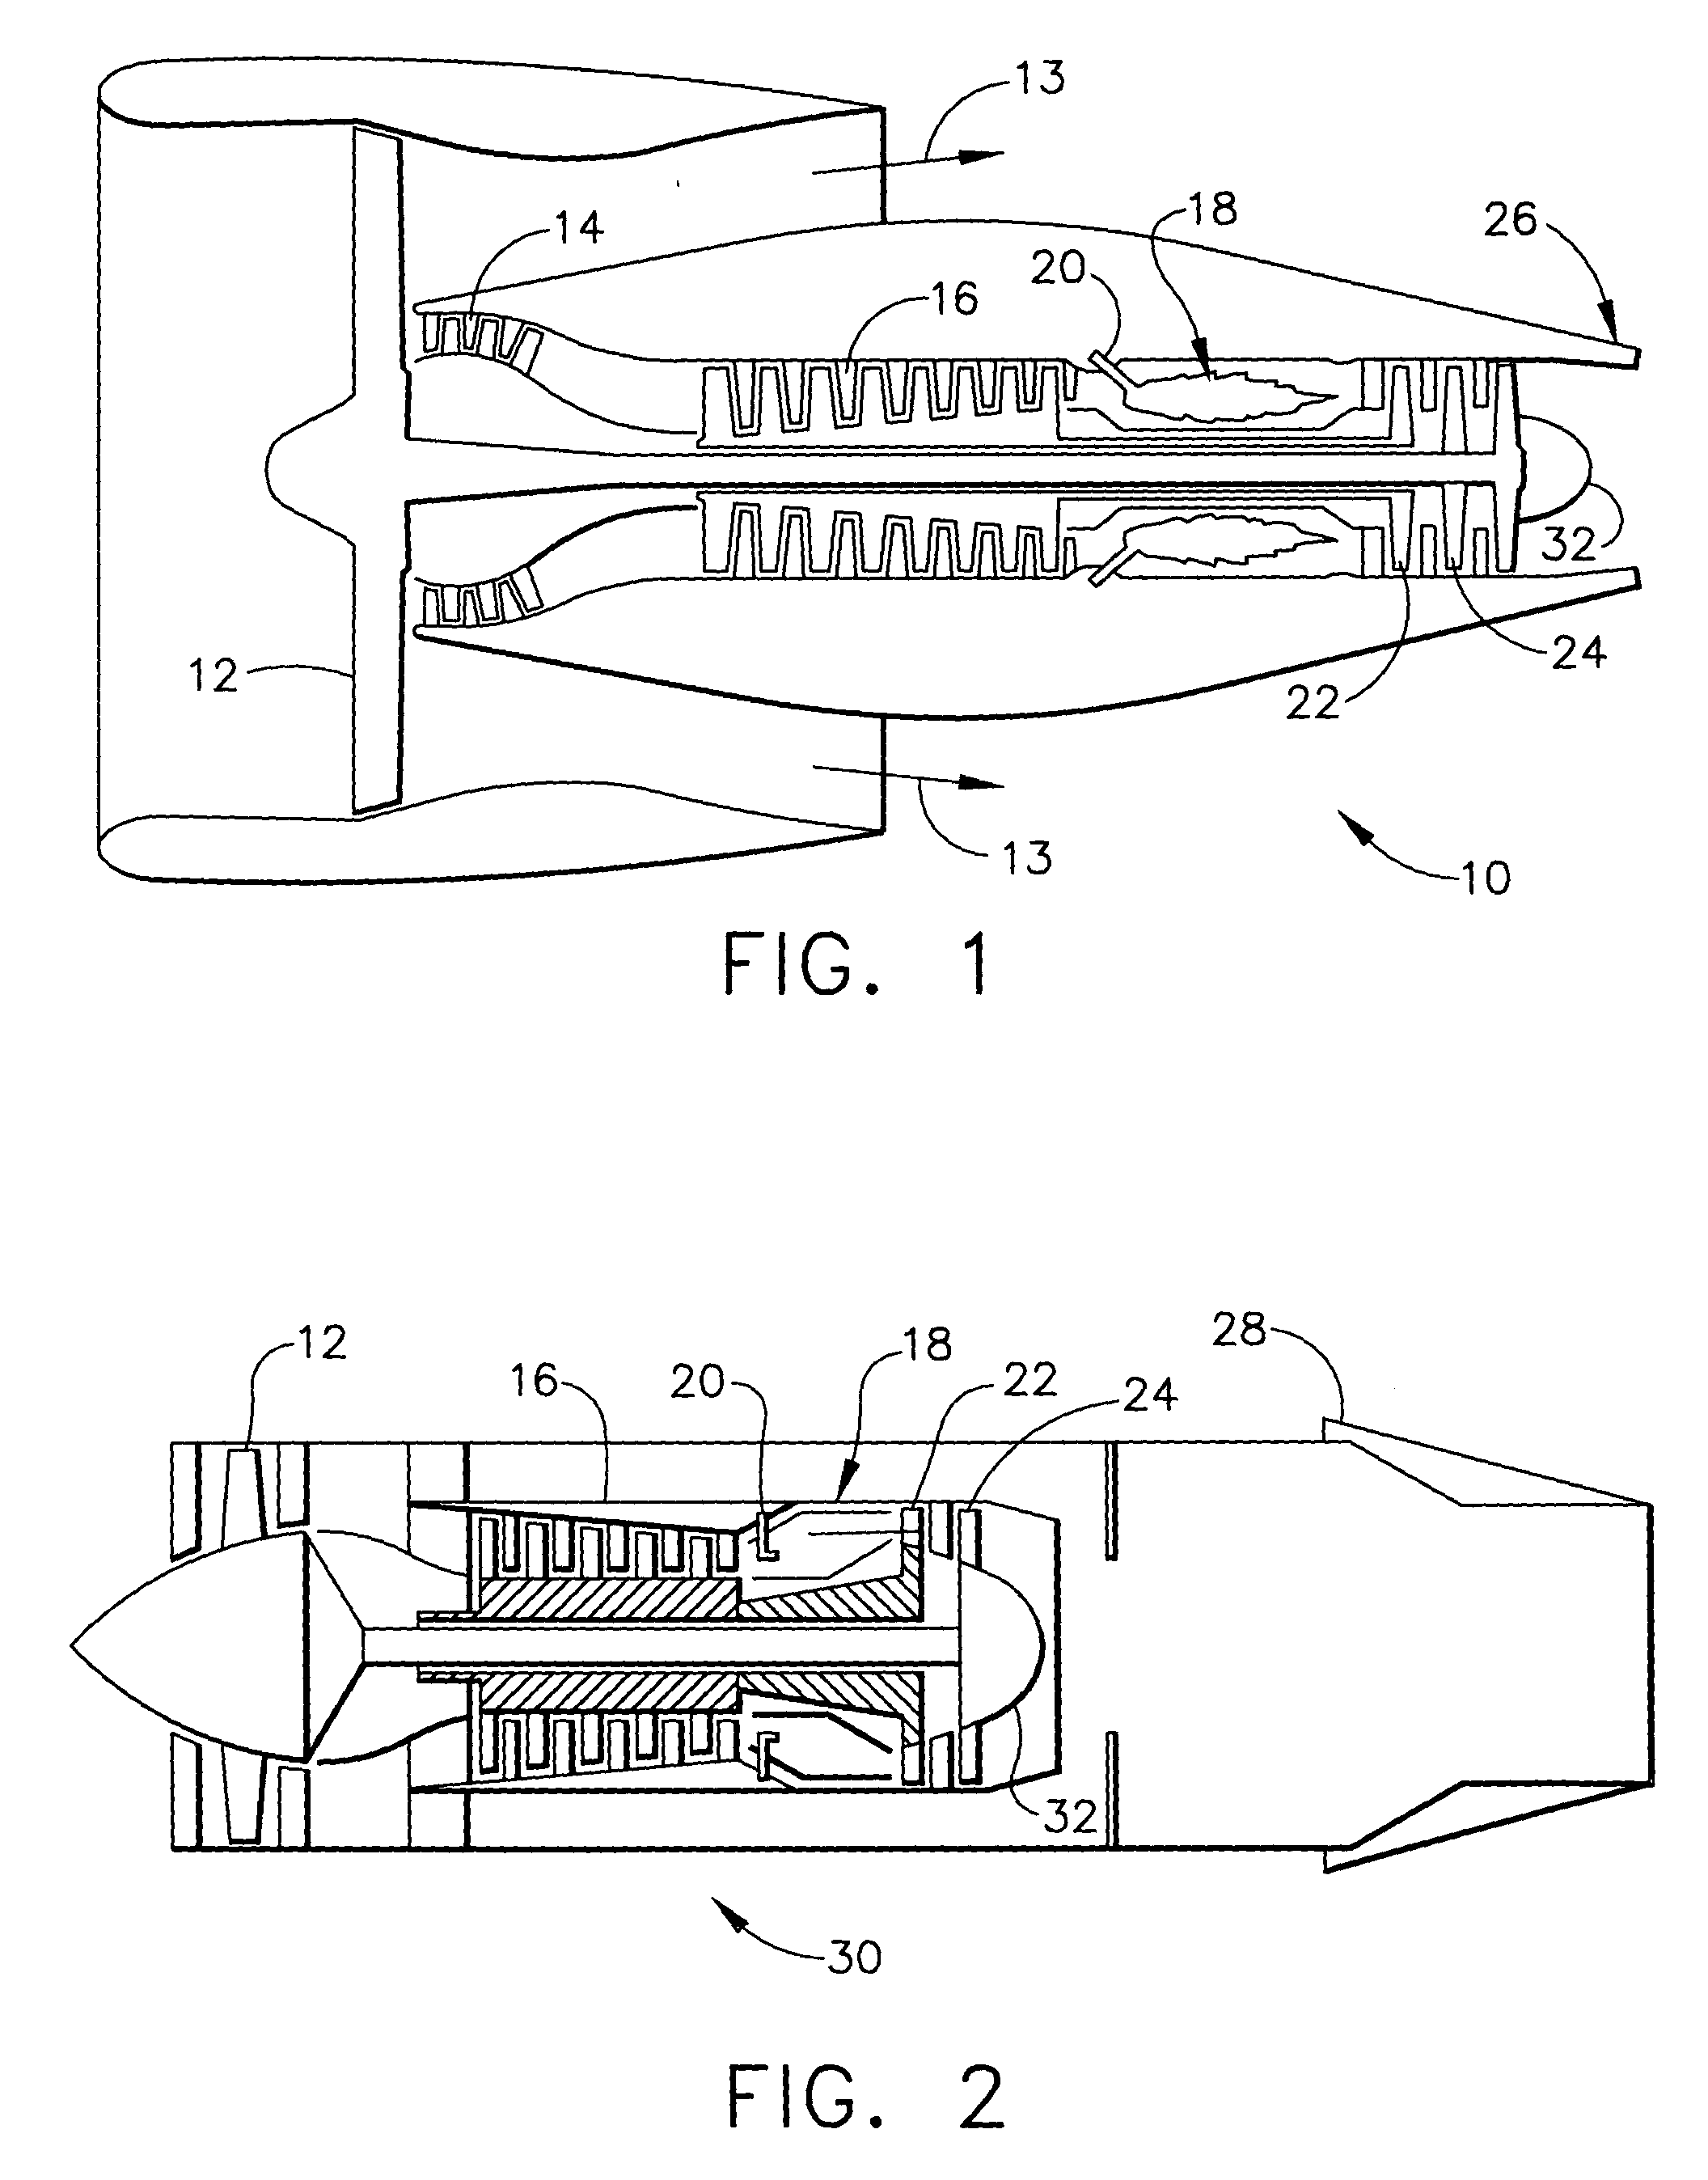 Optical reflector for reducing radiation heat transfer to hot engine parts